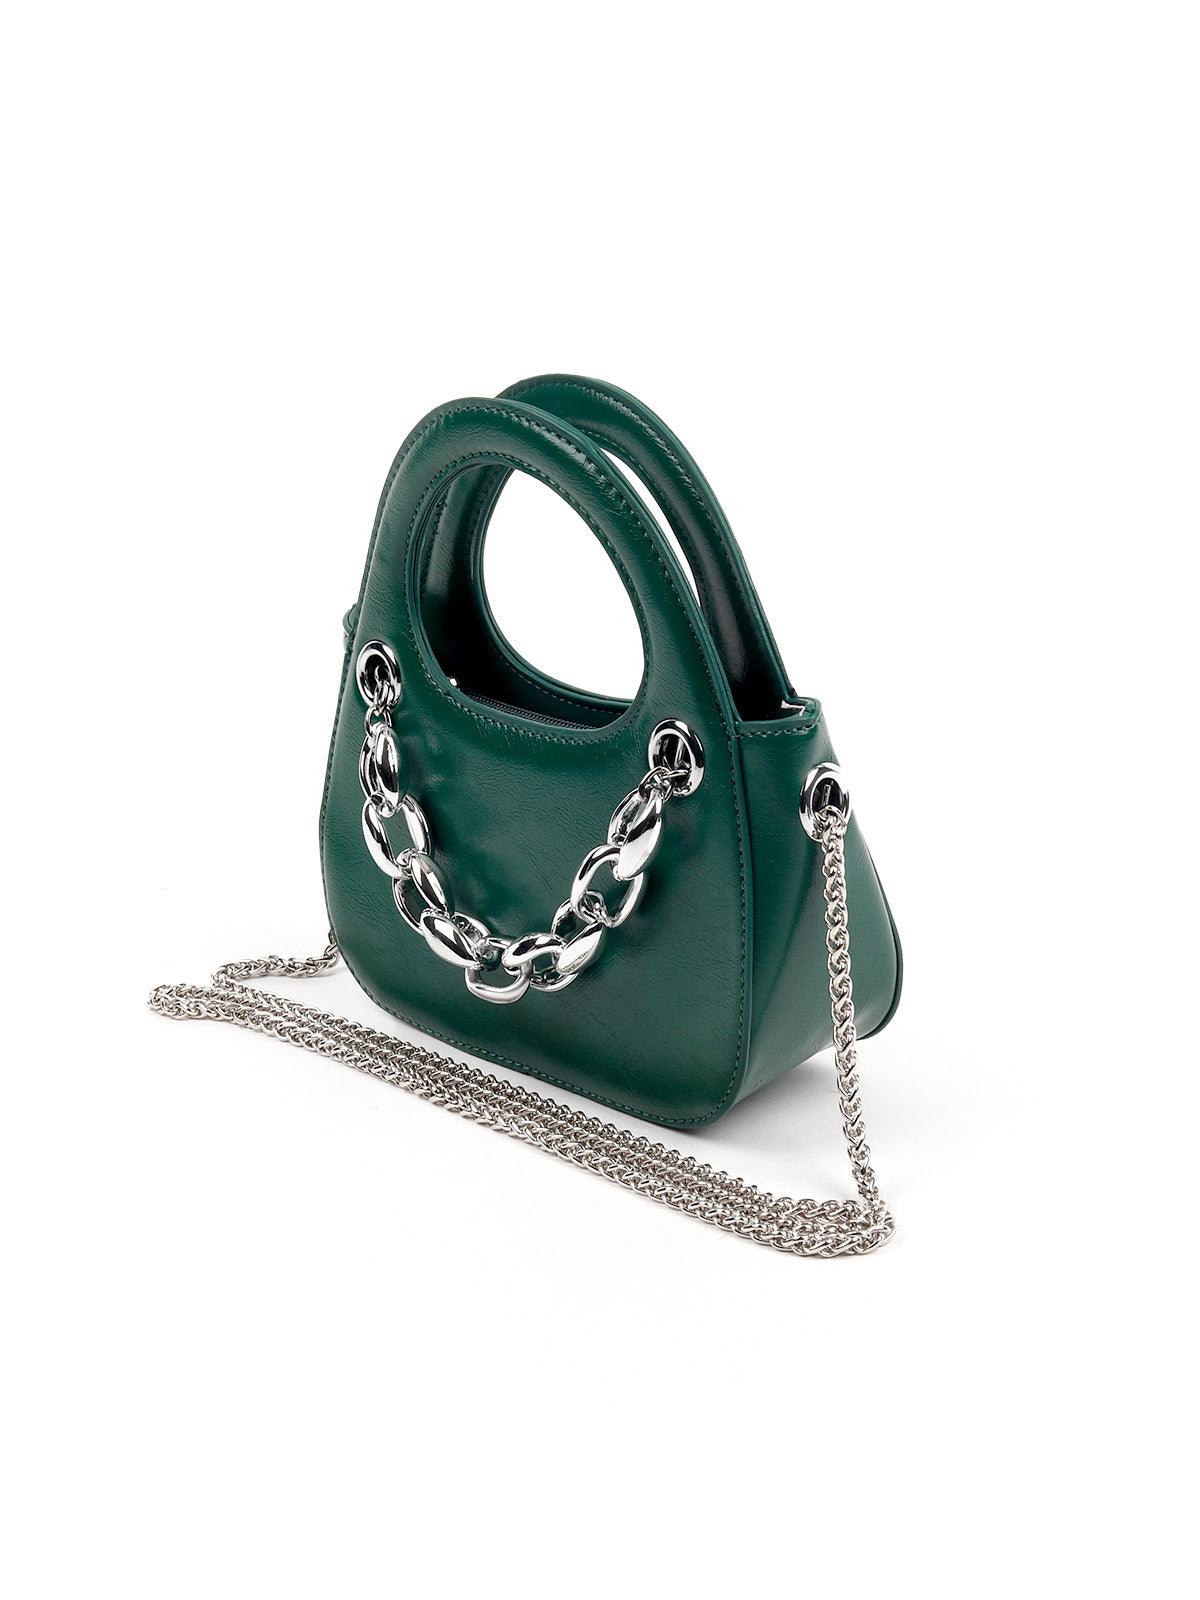 THE VERY SMART GREEN CLUTCH BAG - Odette